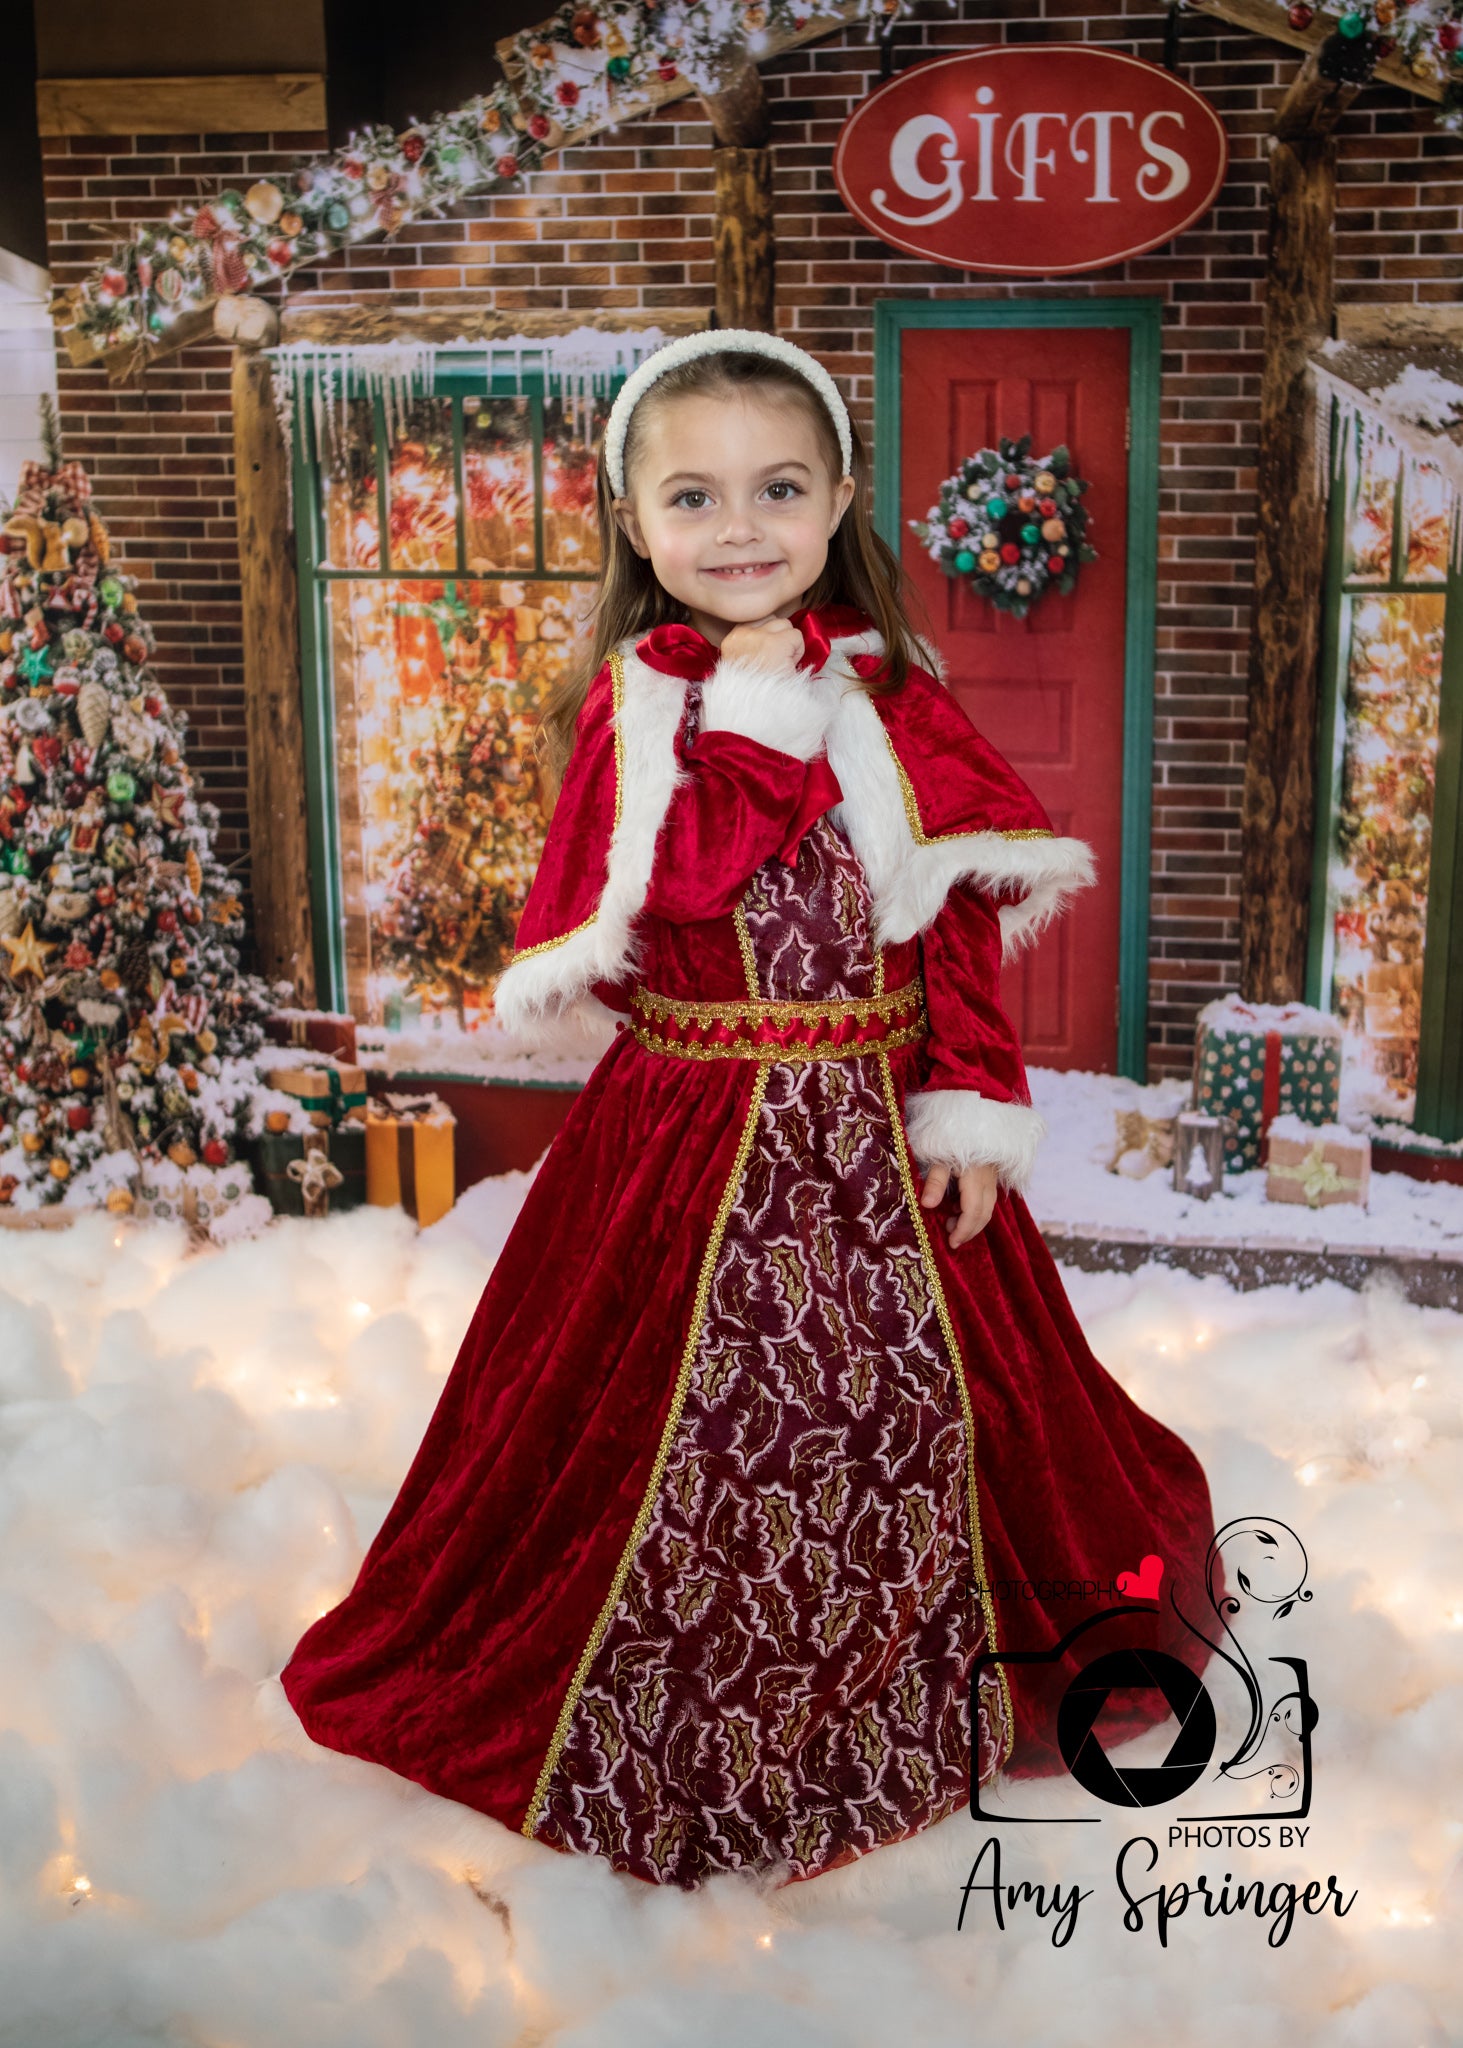 Kate Christmas Giftshop Decorations Snow Backdrop for Photography